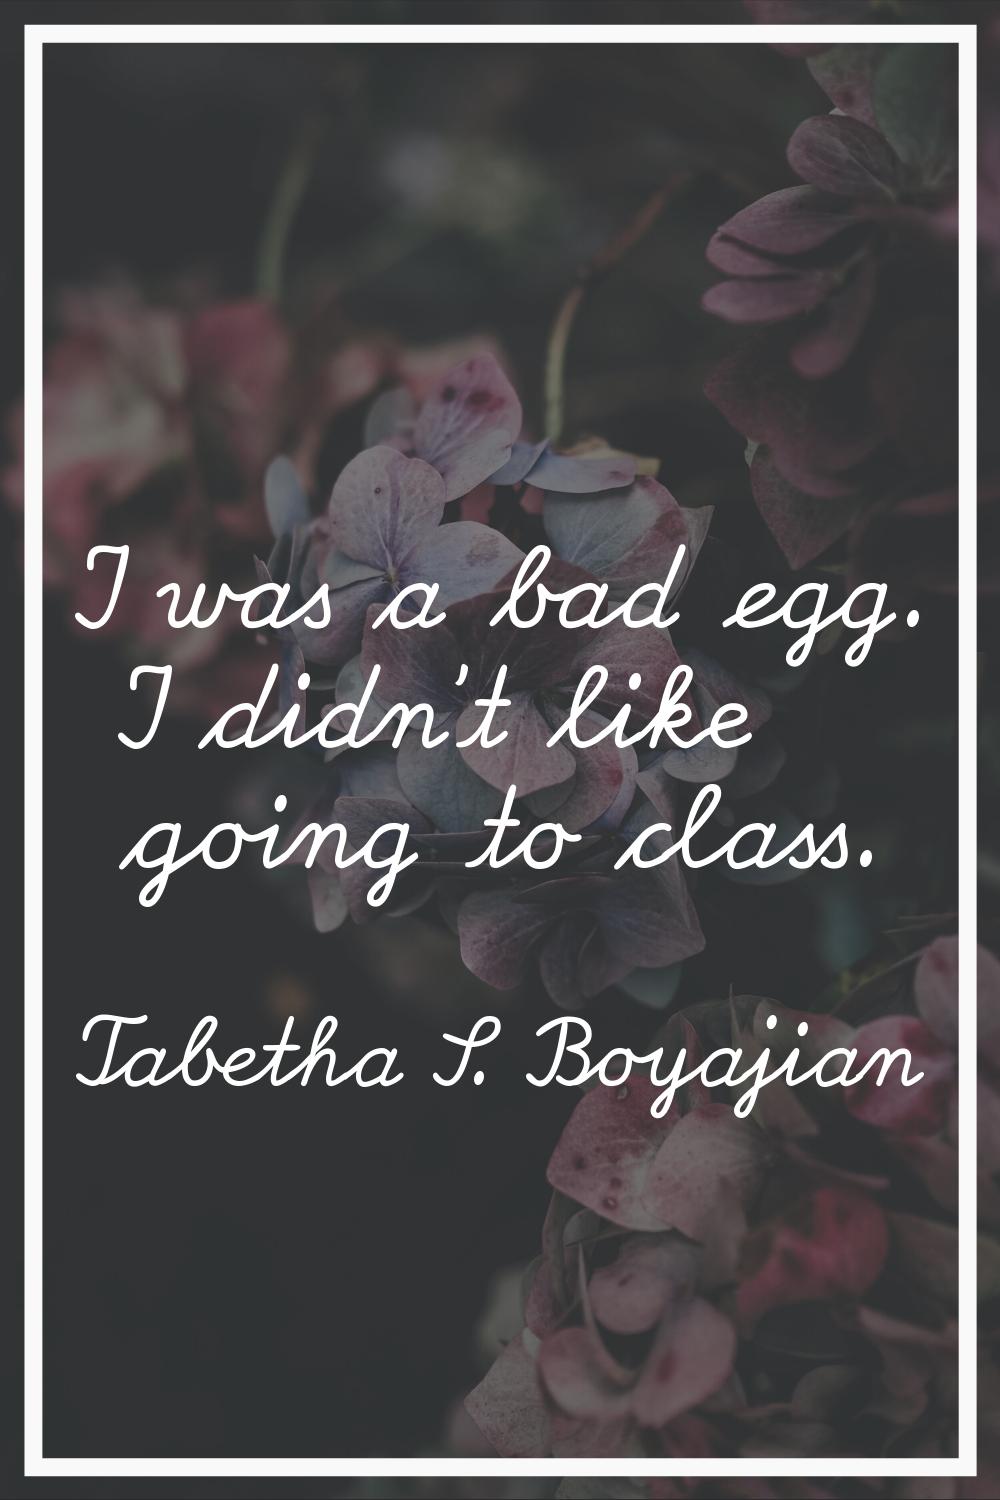 I was a bad egg. I didn't like going to class.